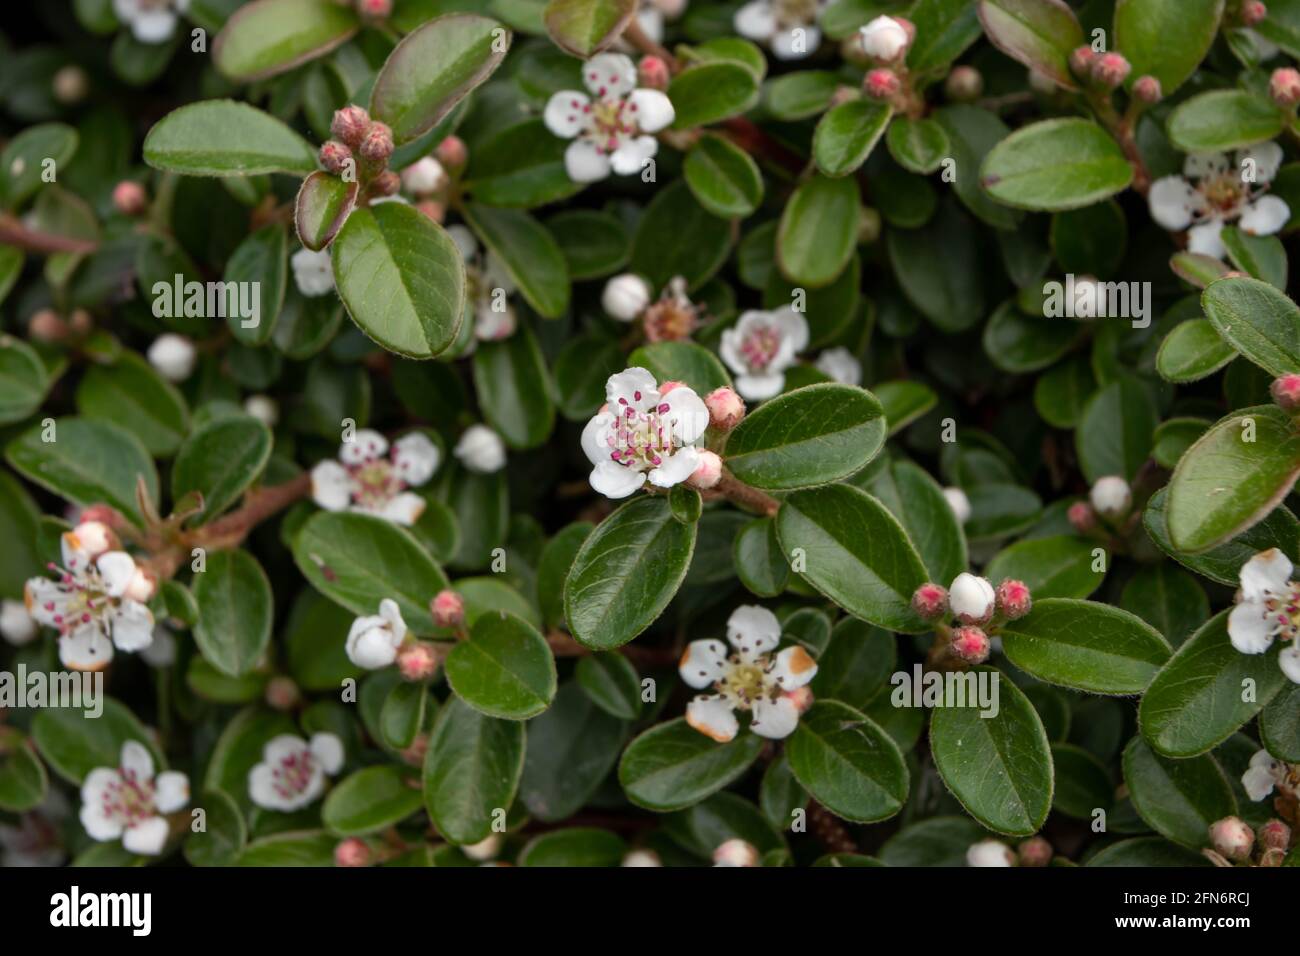 Cotoneaster horizontalis small white flowers with purple stamens Stock Photo